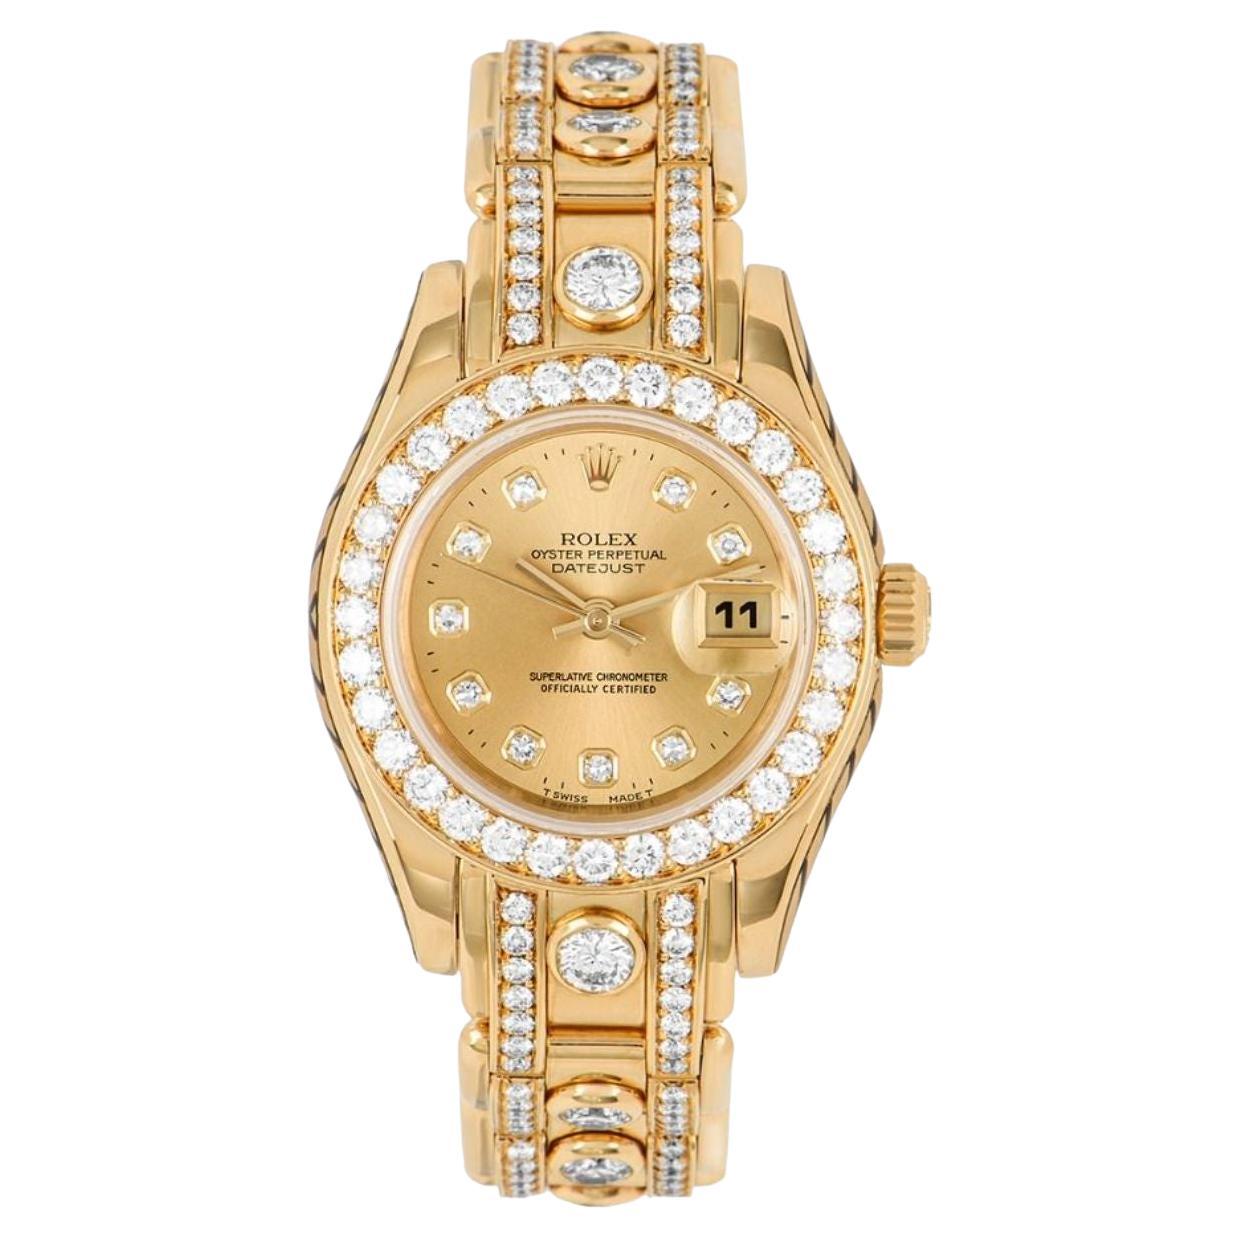 What is the most expensive Rolex?